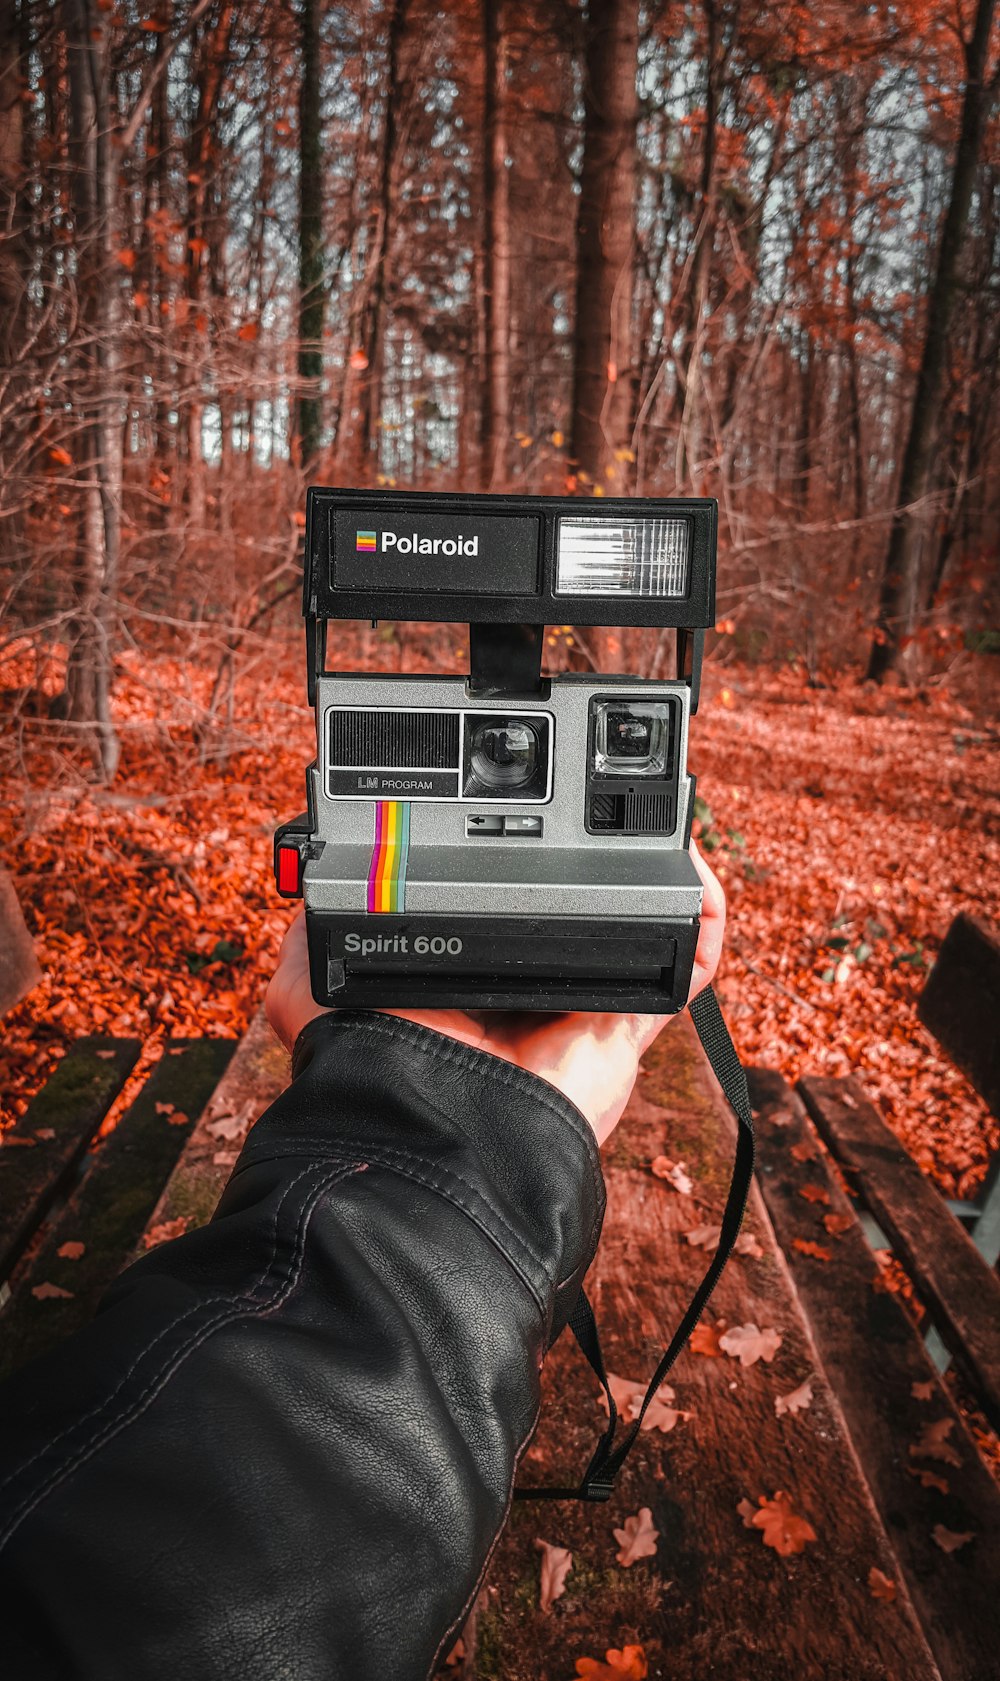 black and white polaroid camera on brown leaves